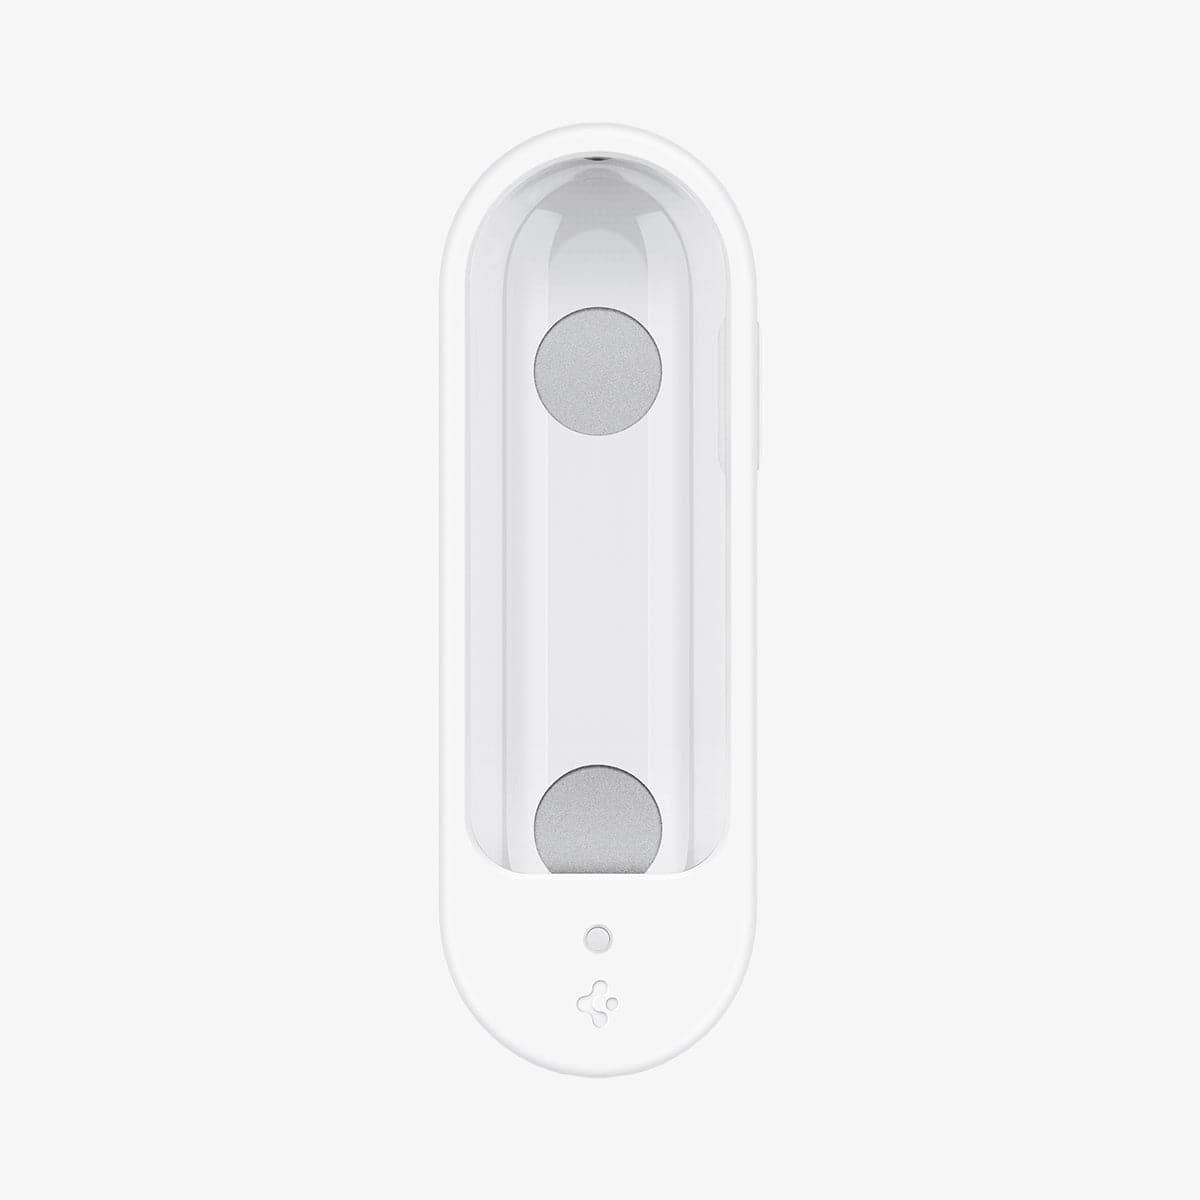 AMP02715 - Chromecast with Google TV Silicone Fit Voice Remote in white showing the inside